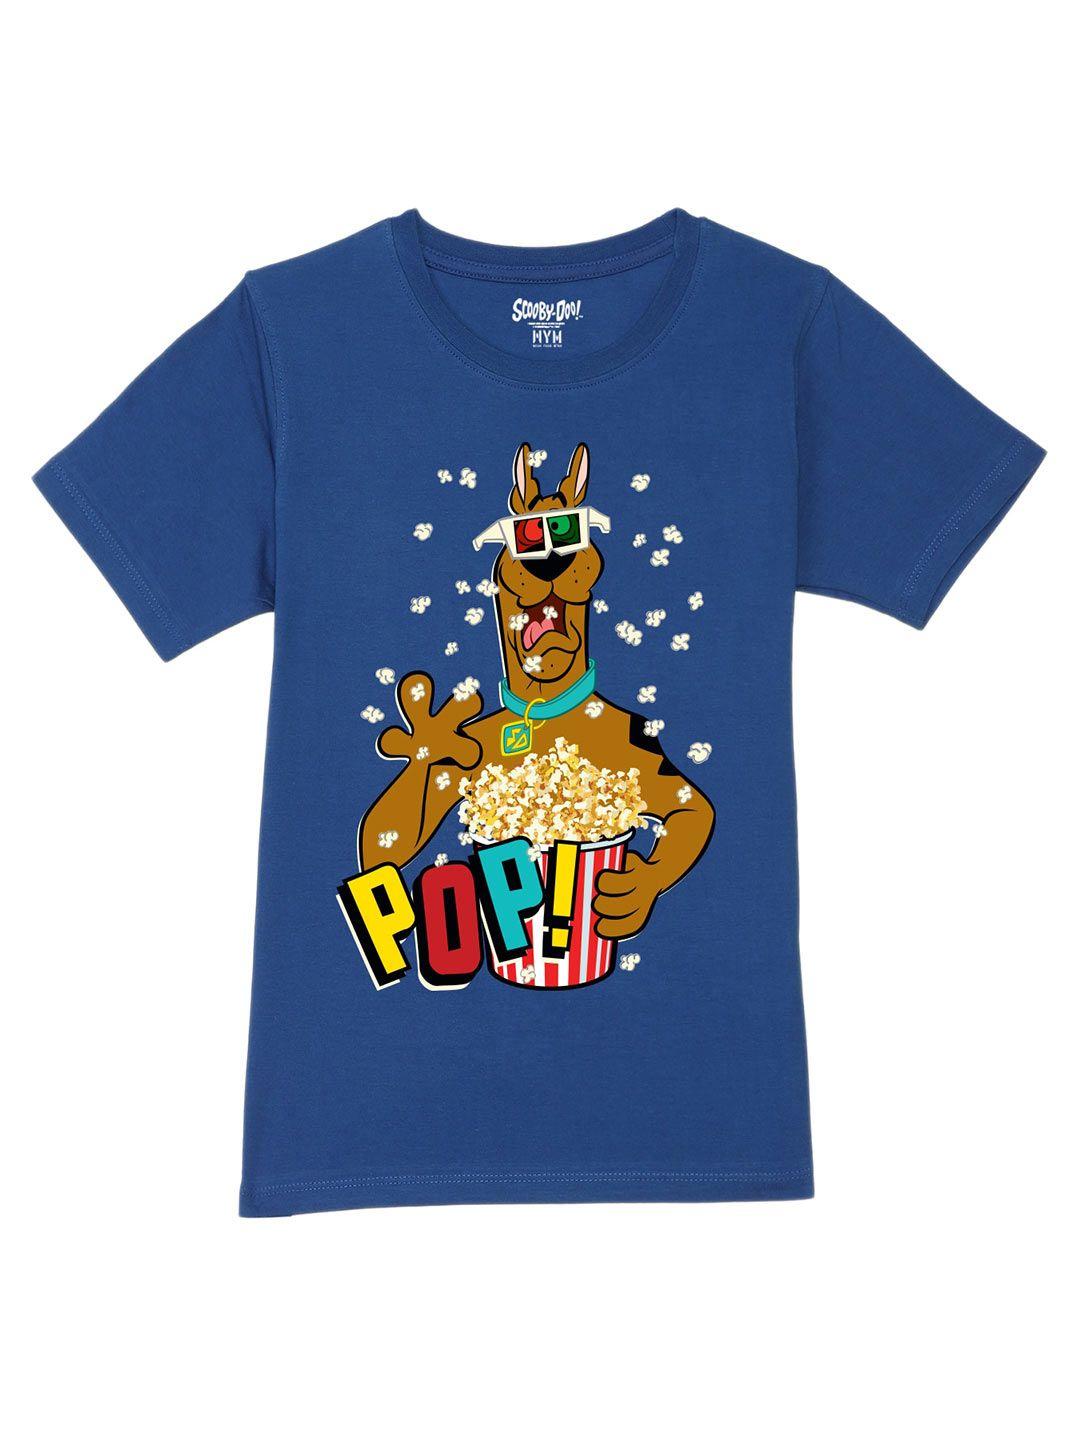 wear your mind boys graphic scooby doo printed pure cotton t-shirt